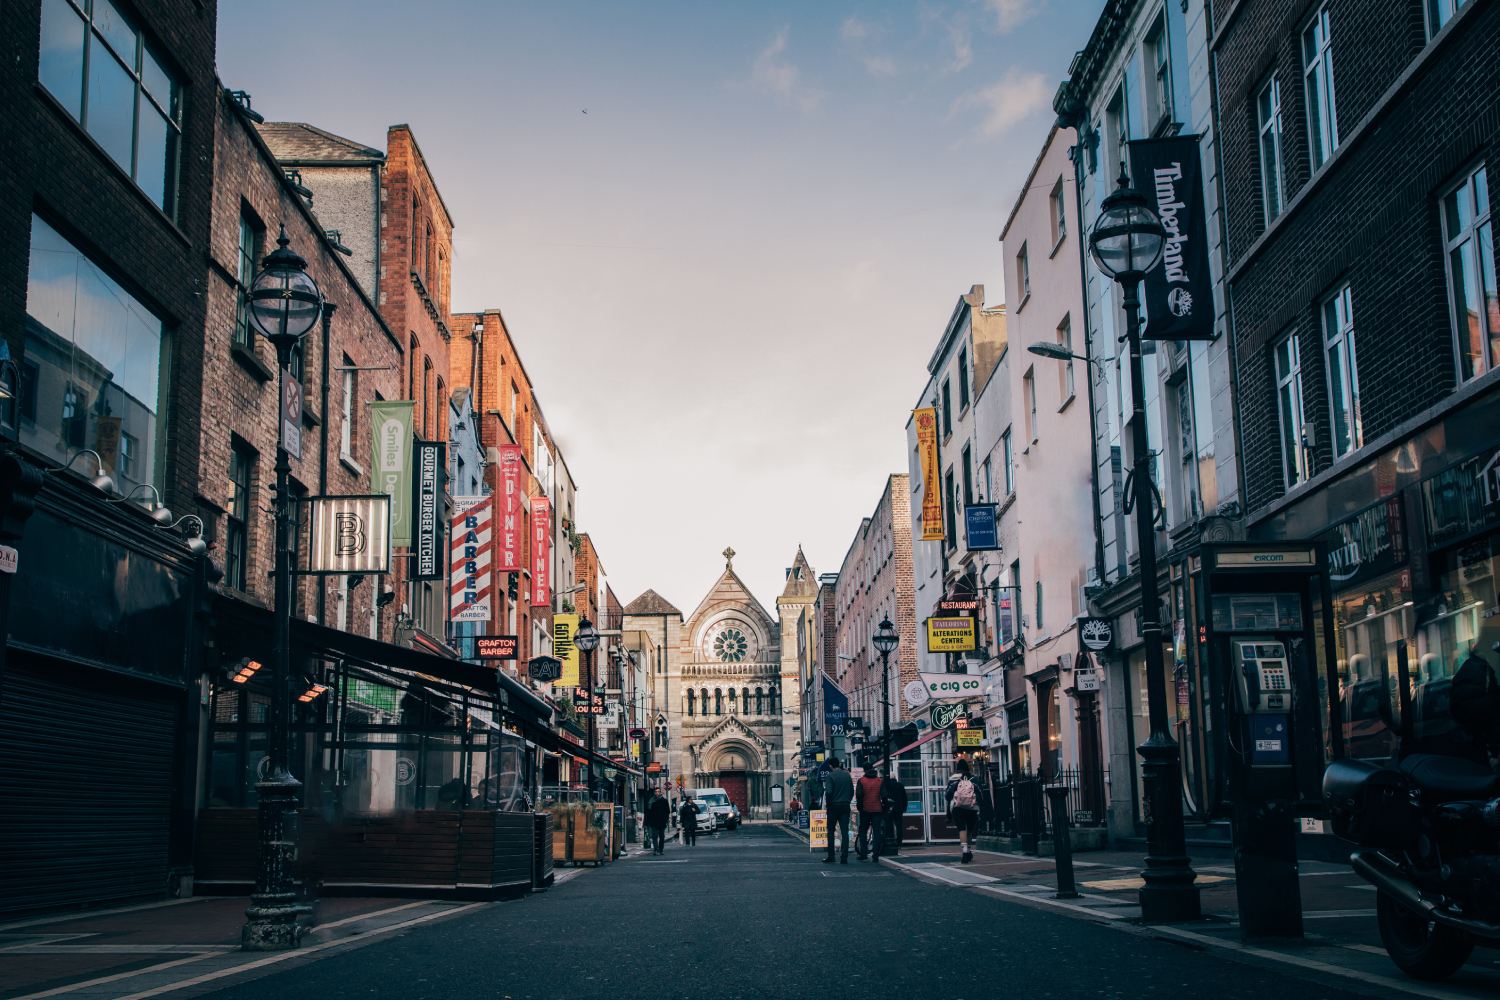 Visit Anne Street during your 3 days in Dublin